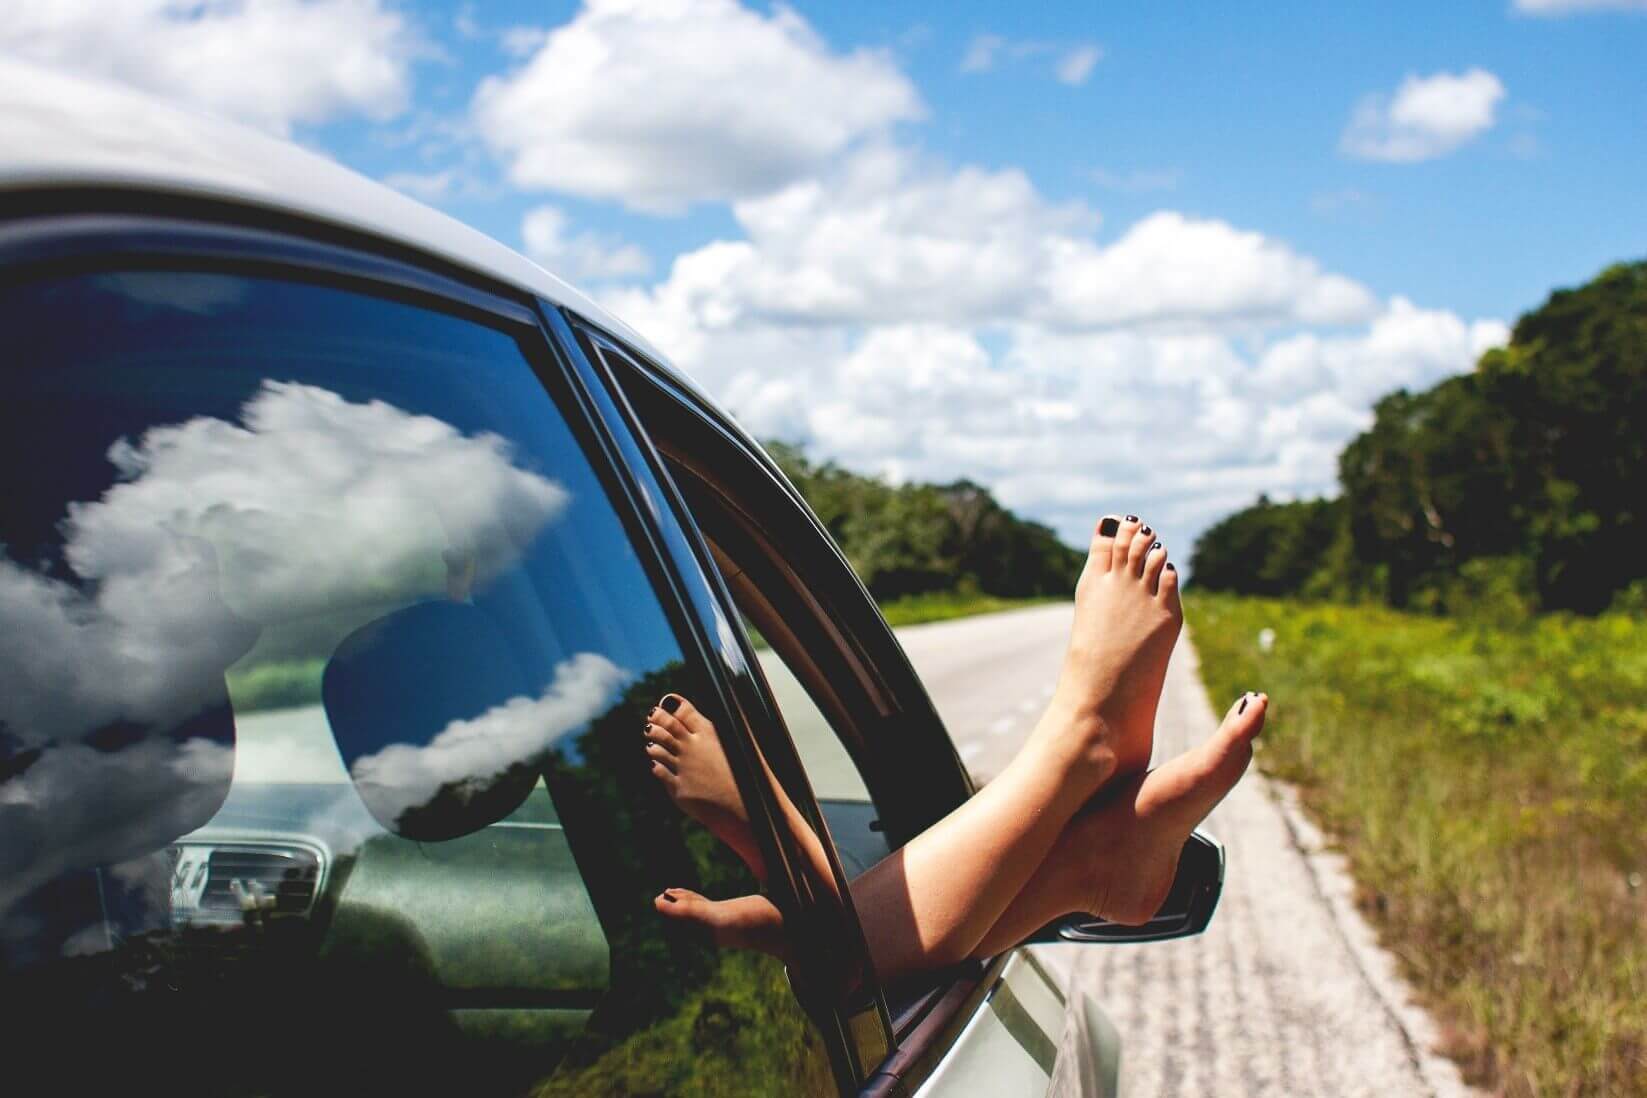 Woman puts her feet out of the car on a sunny day